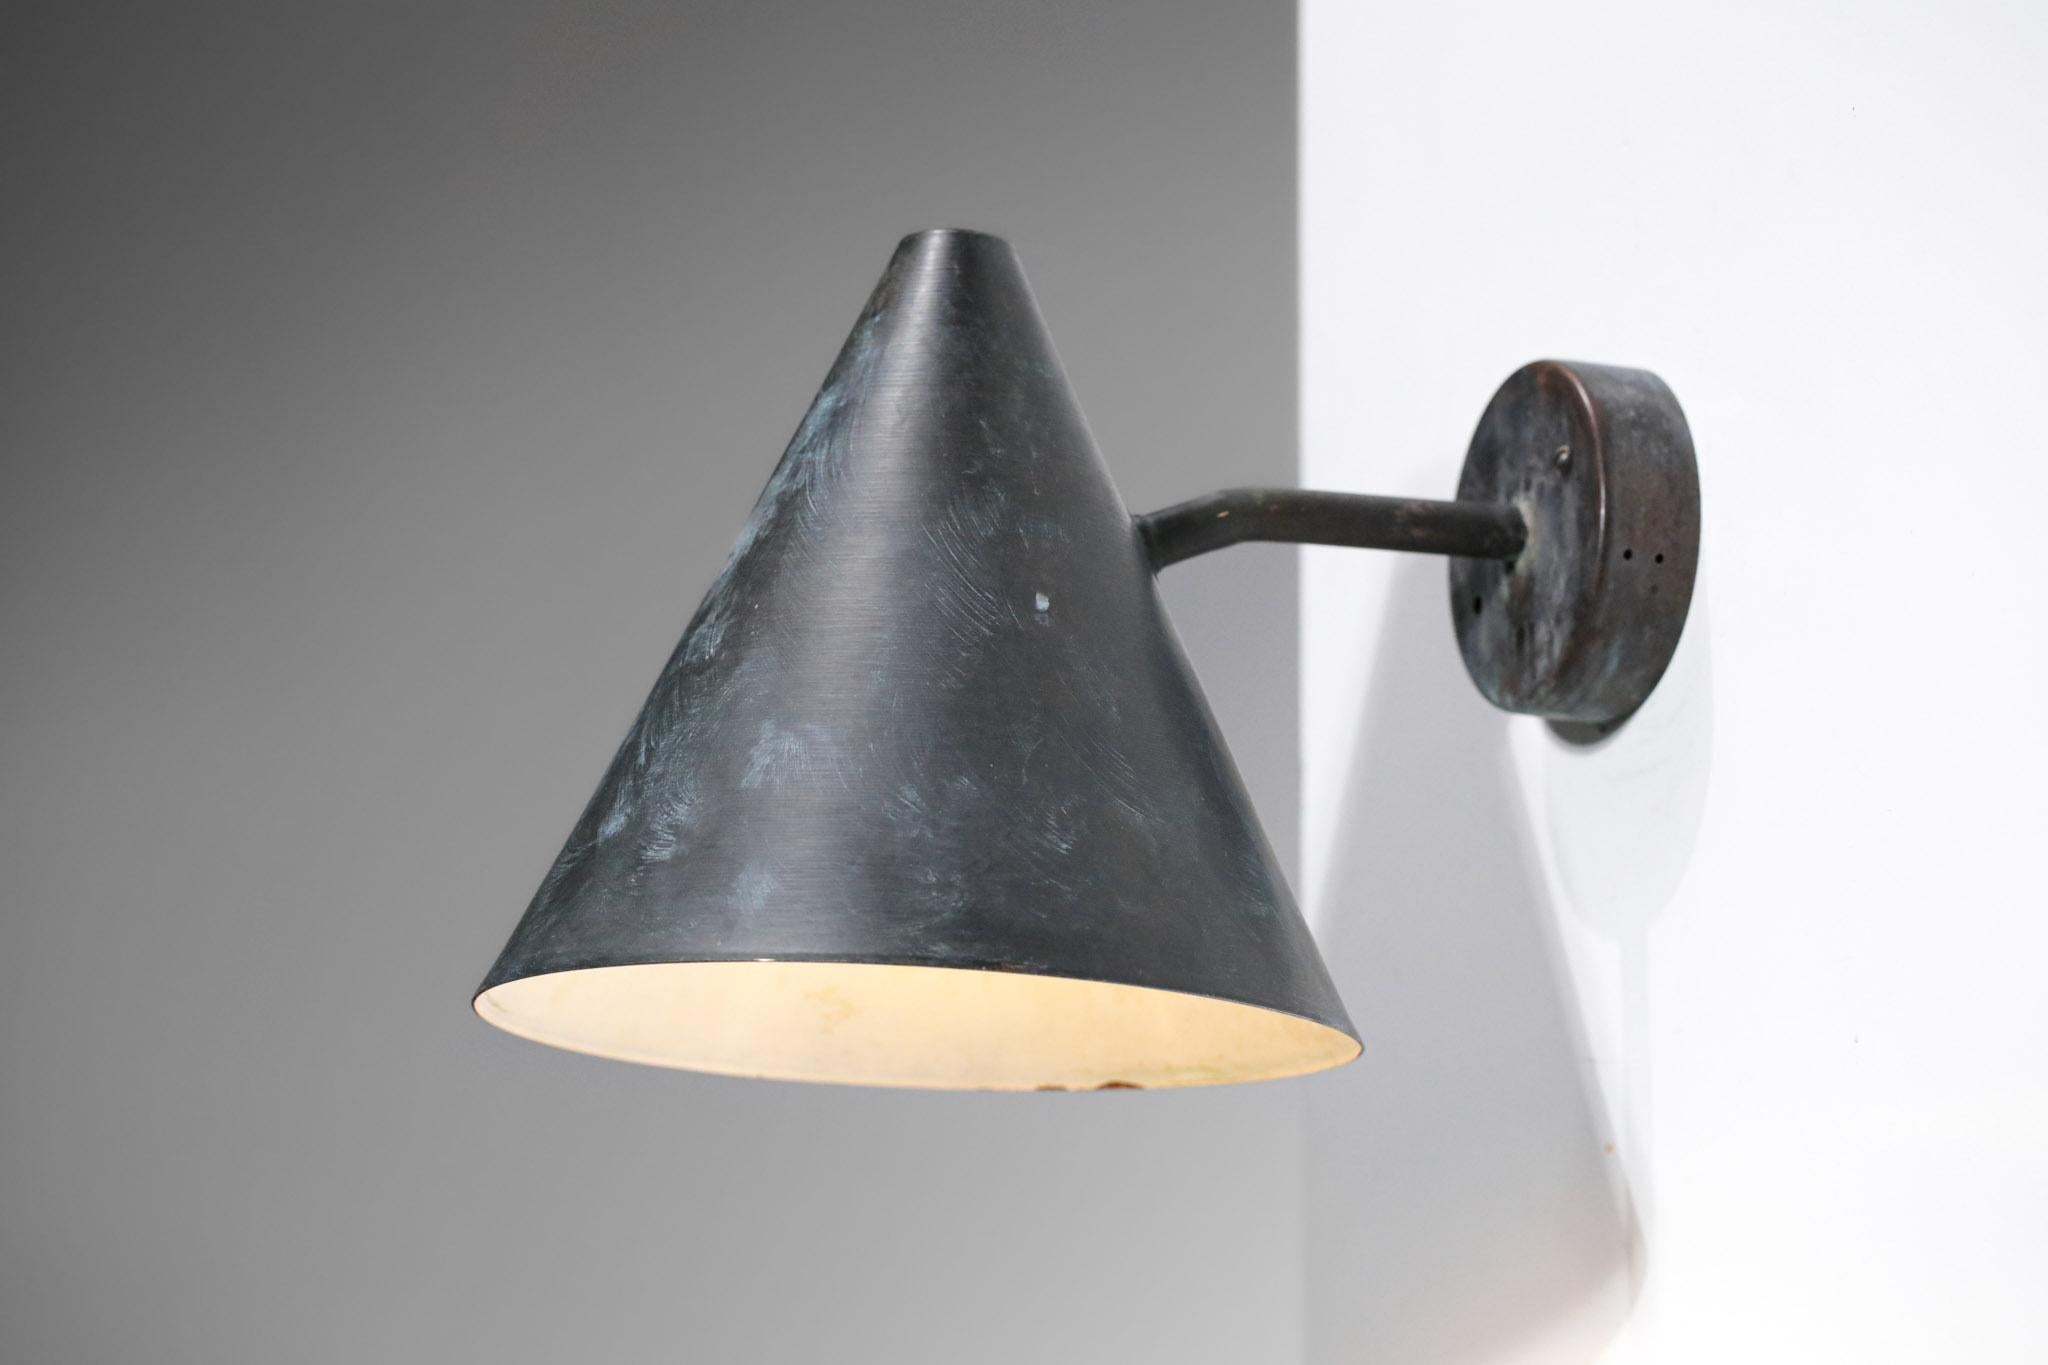 Large Wall Lamp Hans Agne Jakobsson Tratten Patina Years 60, F590 For Sale 3